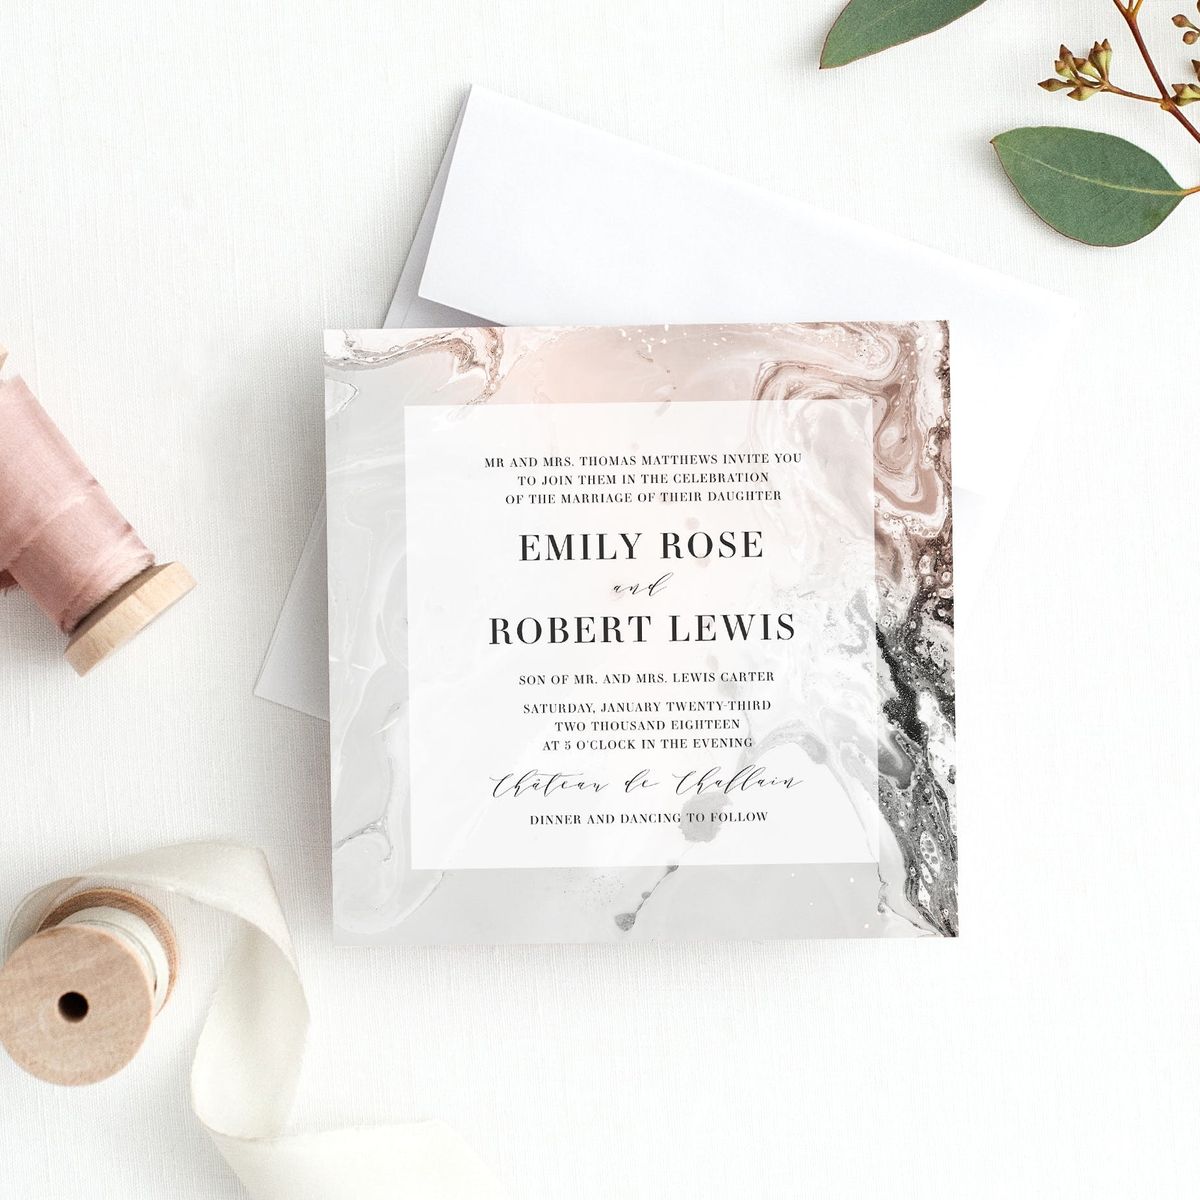 Top 6 Wedding Invitation Trends We Spotted on Etsy